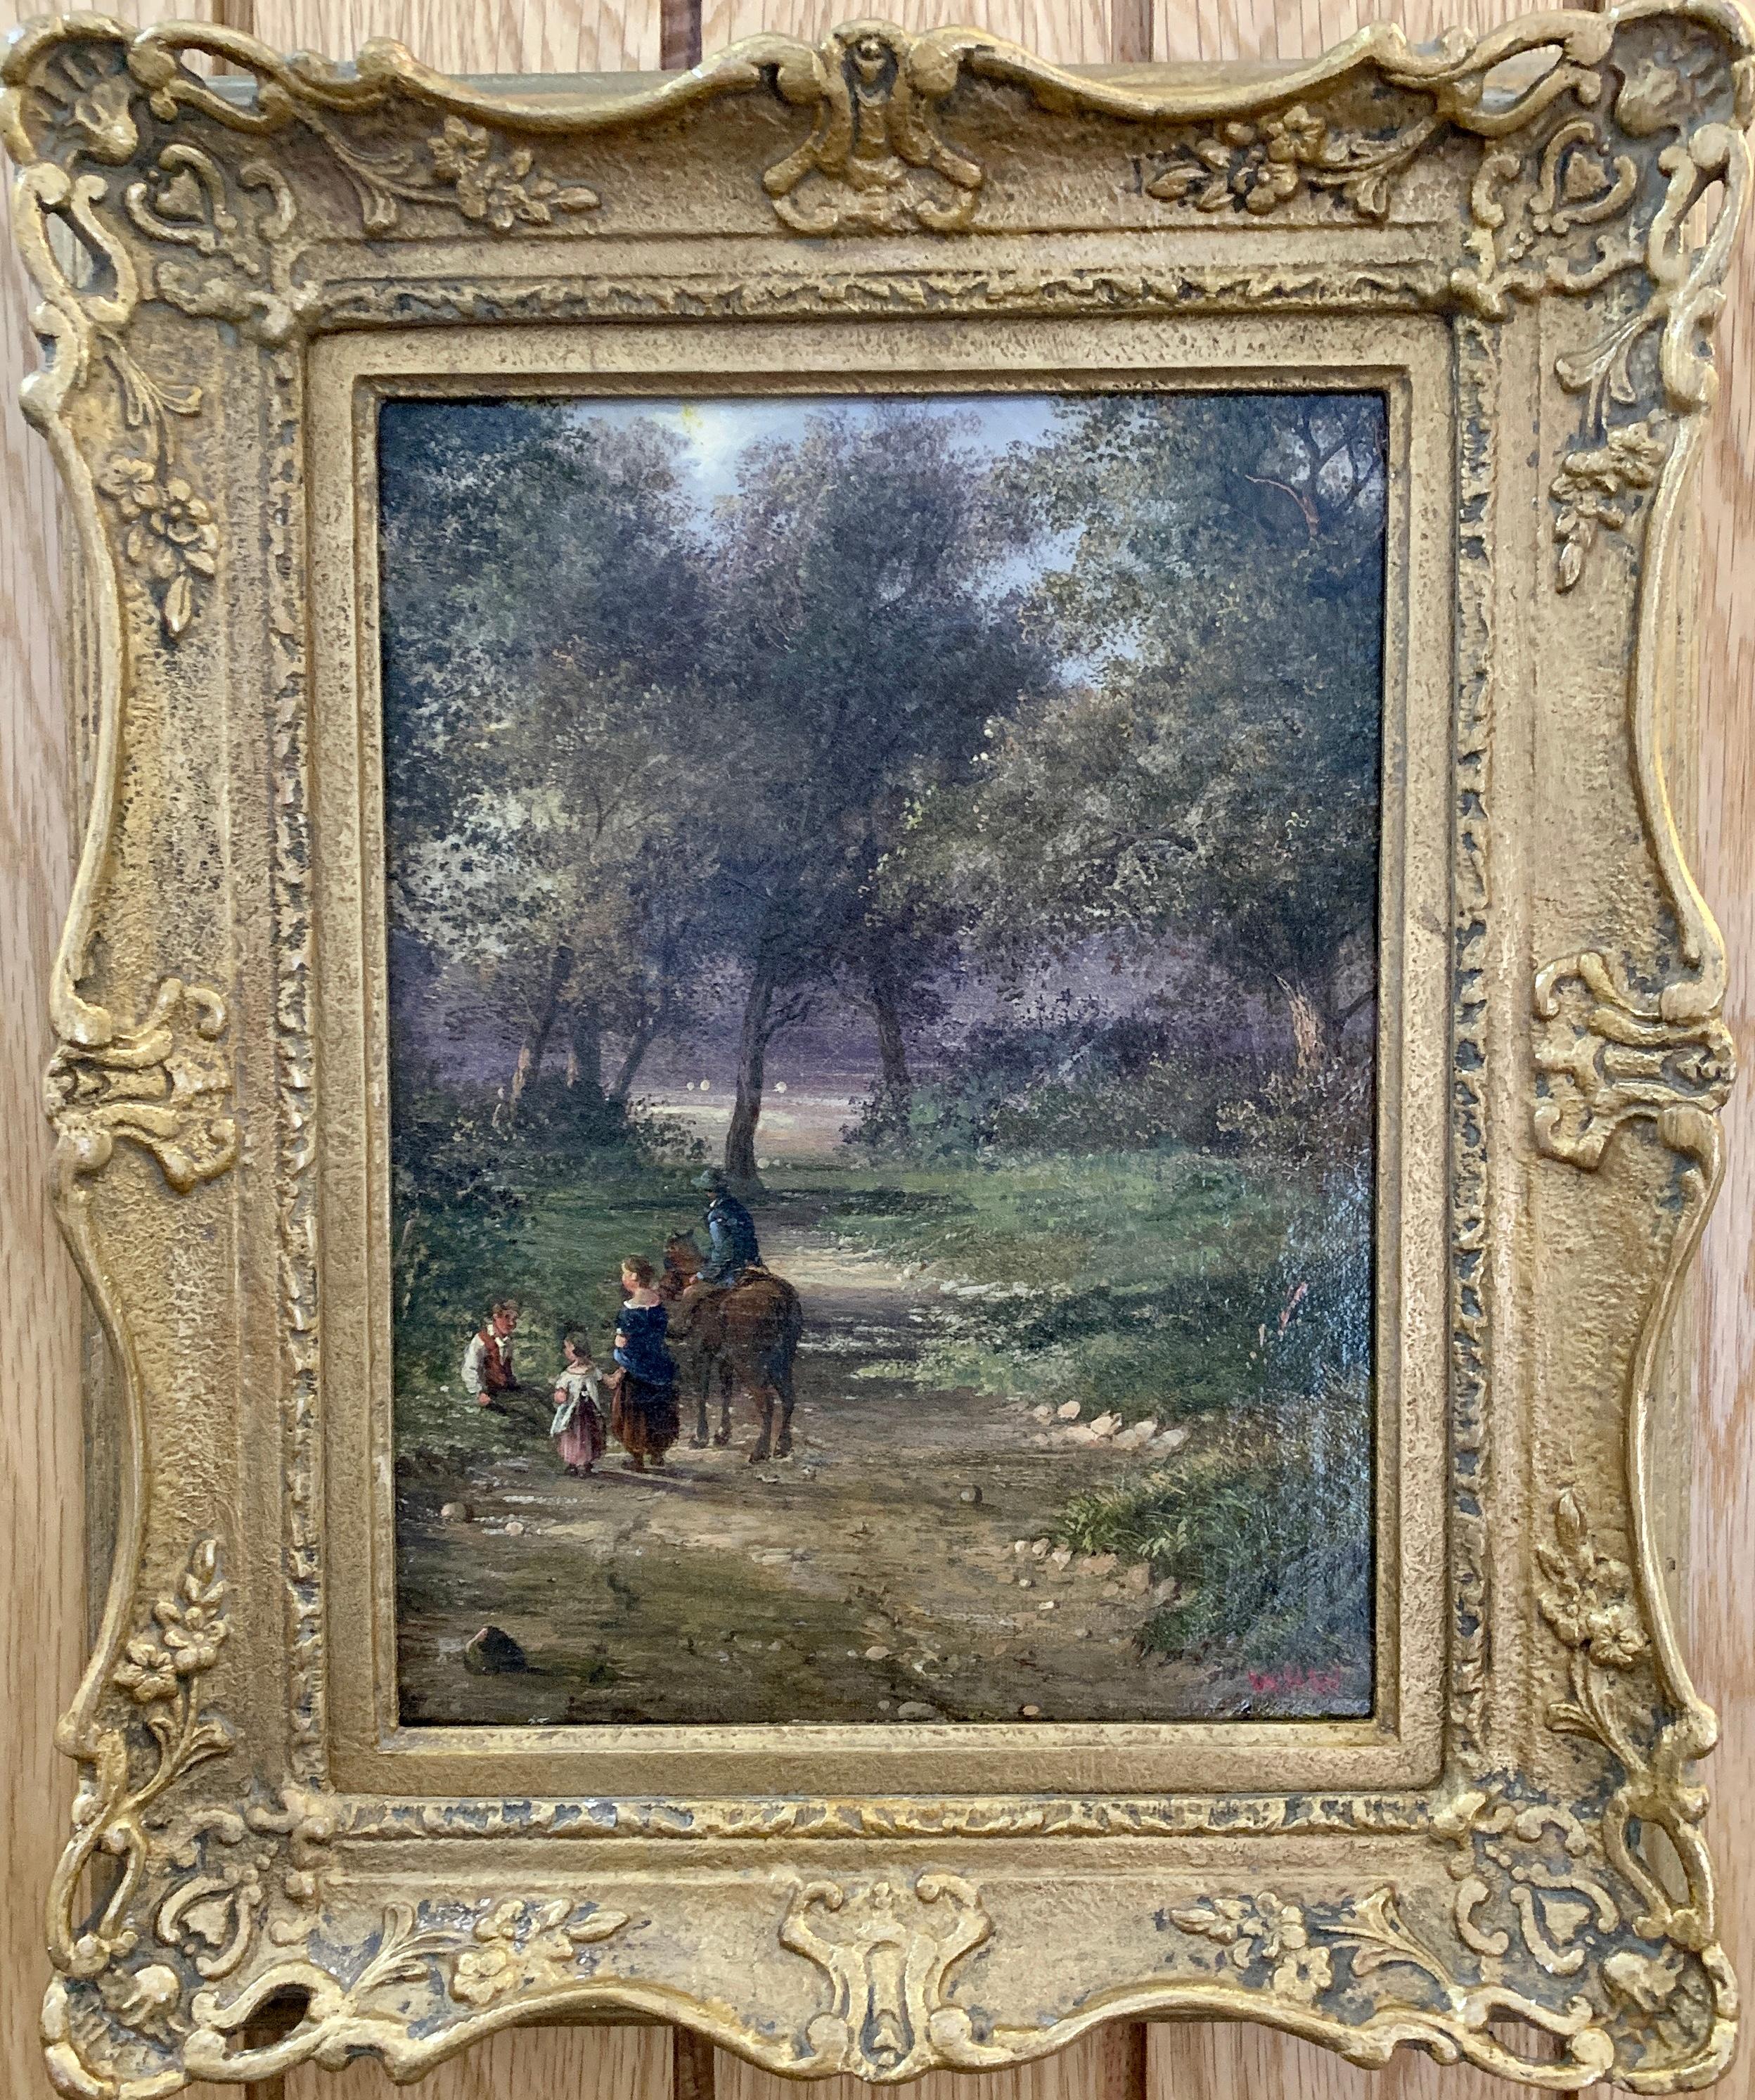 Walter Heath Williams Figurative Painting - English 19th century landscape with figures and a man on a horse in a woodland